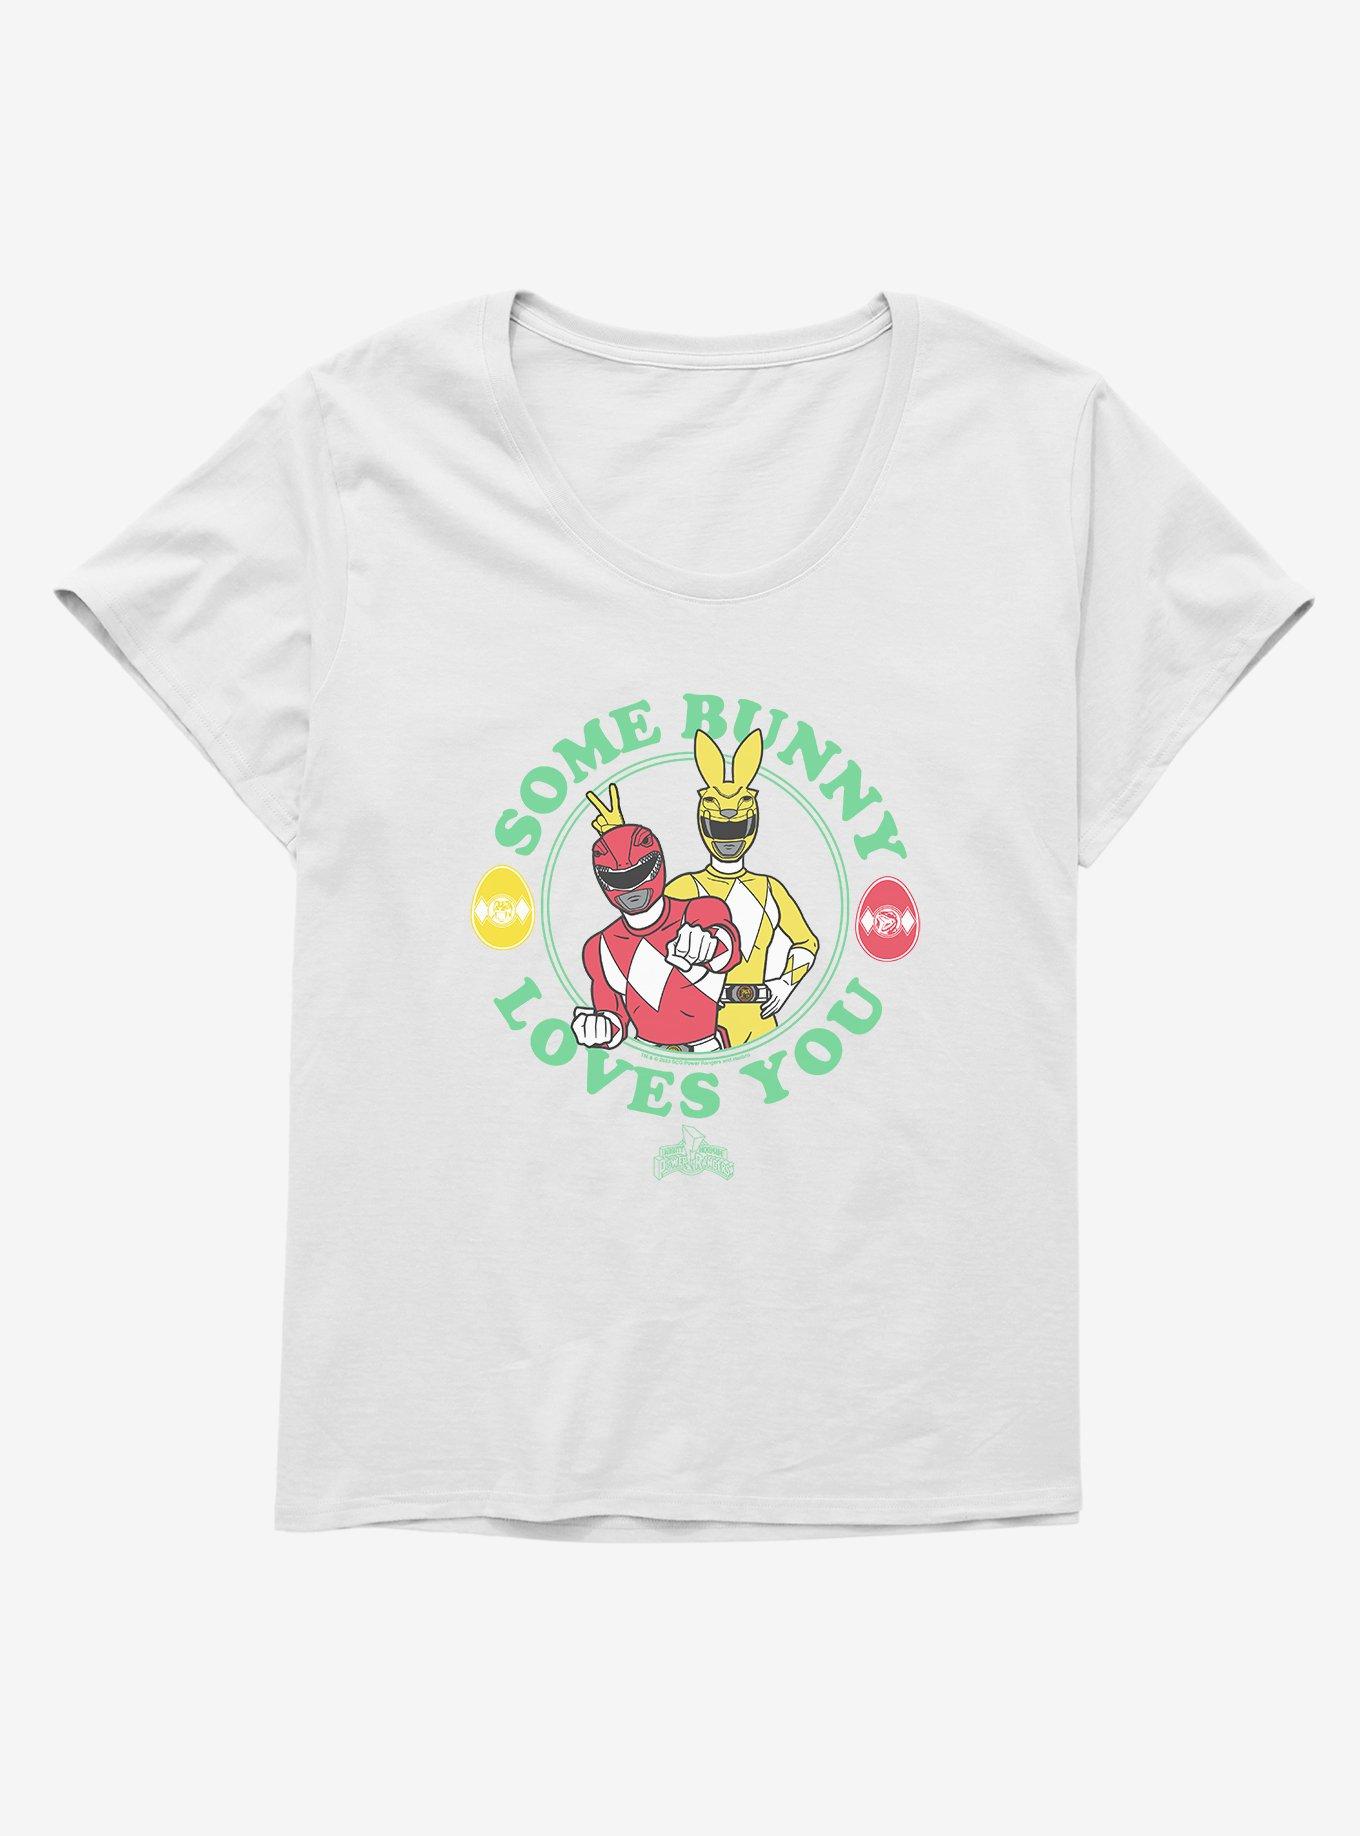 Mighty Morphin Power Rangers Some Bunny Loves You Girls T-Shirt Plus Size, WHITE, hi-res